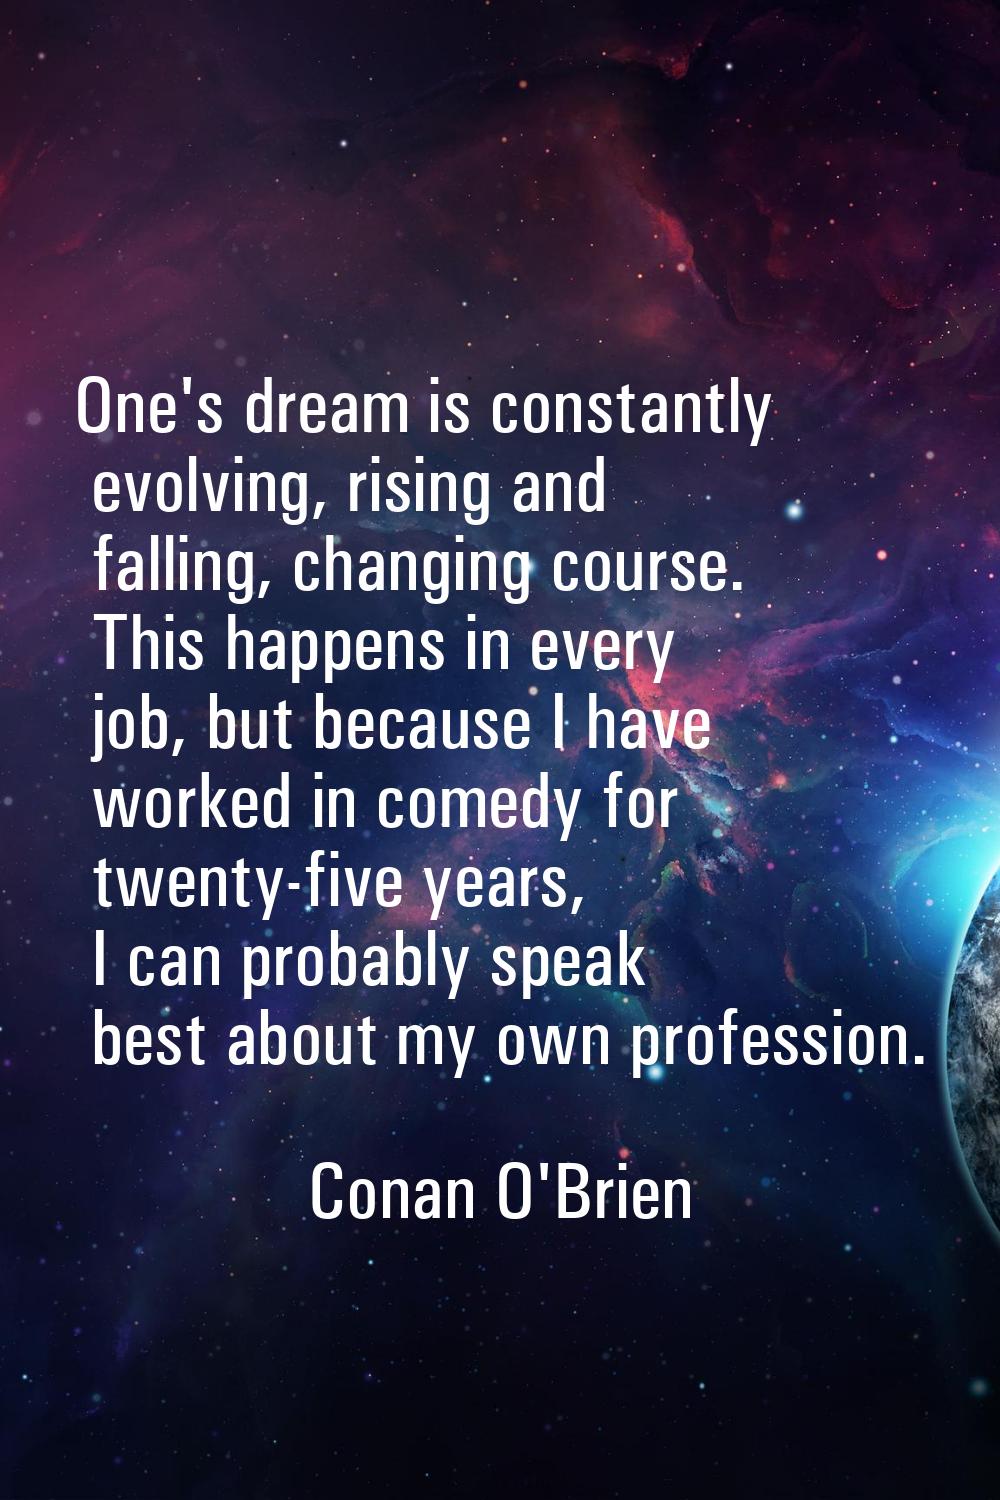 One's dream is constantly evolving, rising and falling, changing course. This happens in every job,